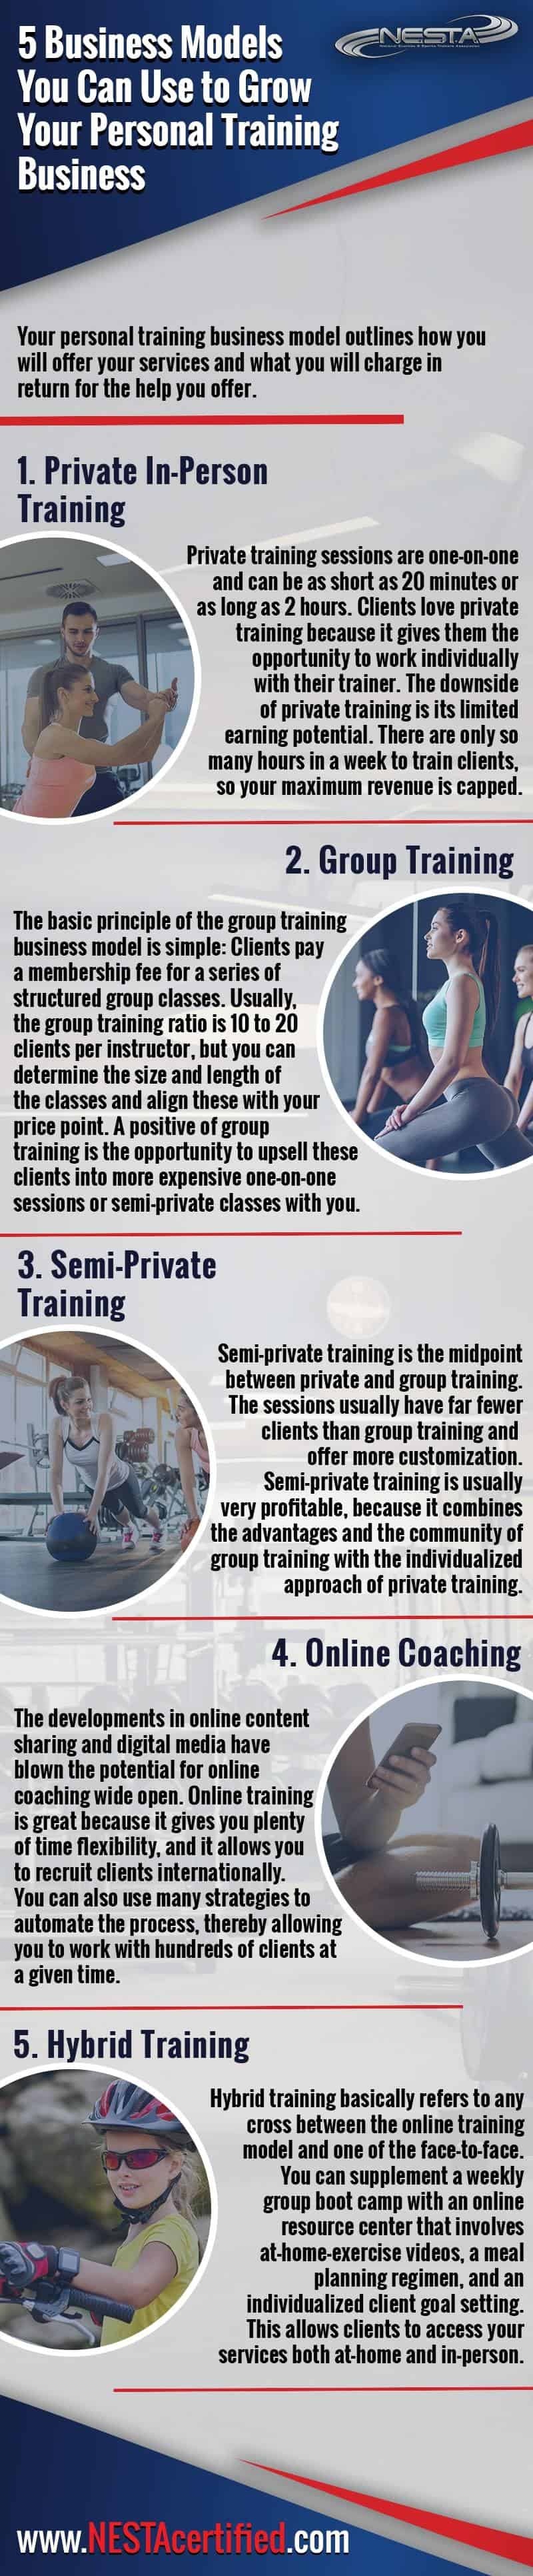 Your personal training business model outlines how you will offer your services and what you will charge in return for the help you offer.